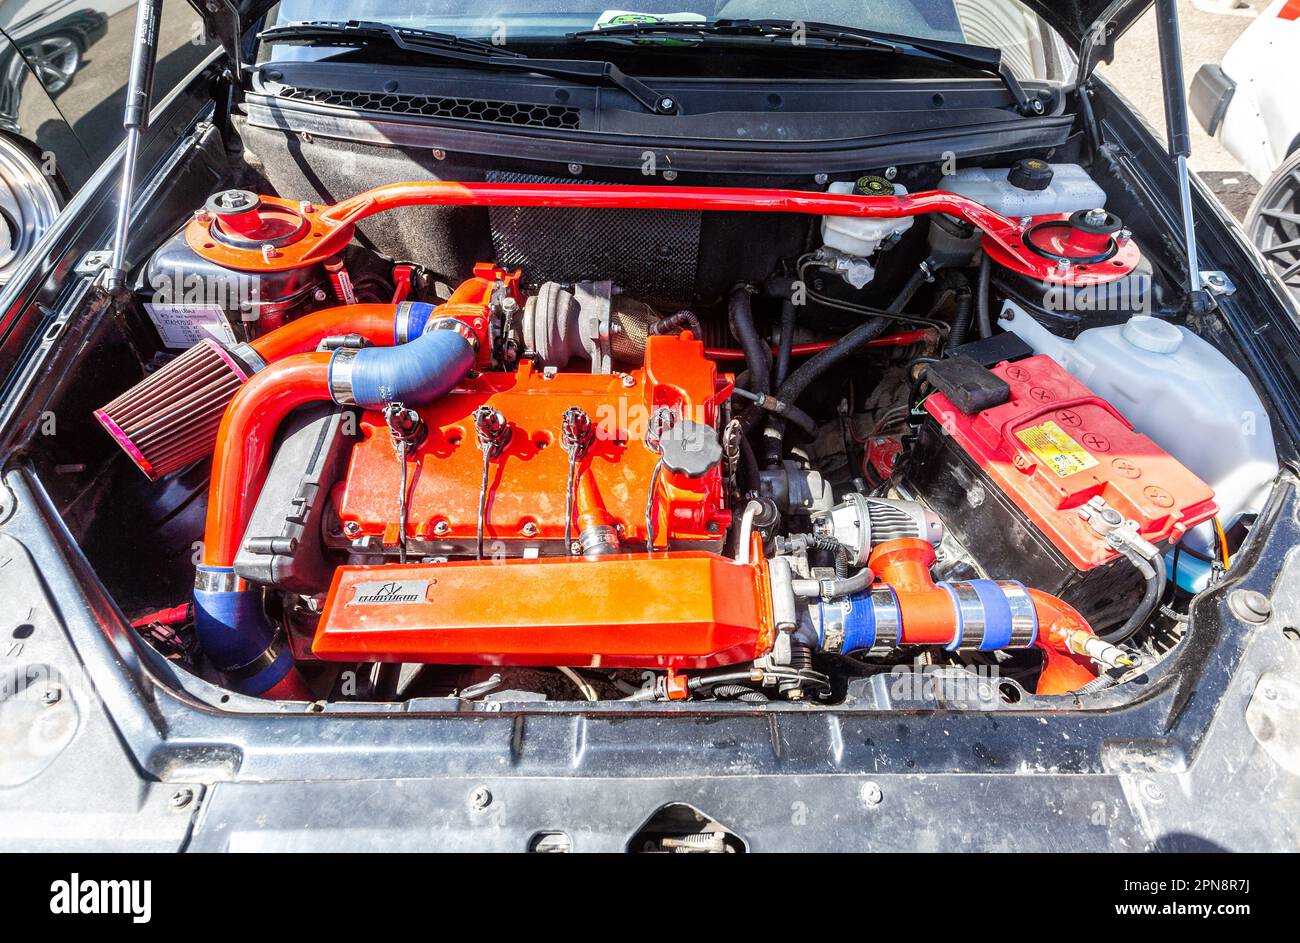 Samara, Russia - May 8, 2022: Tuned car engine with turbine of Lada 2170 Priora vehicle, under the hood of a vehicle. Motor with turbocharger Stock Photo